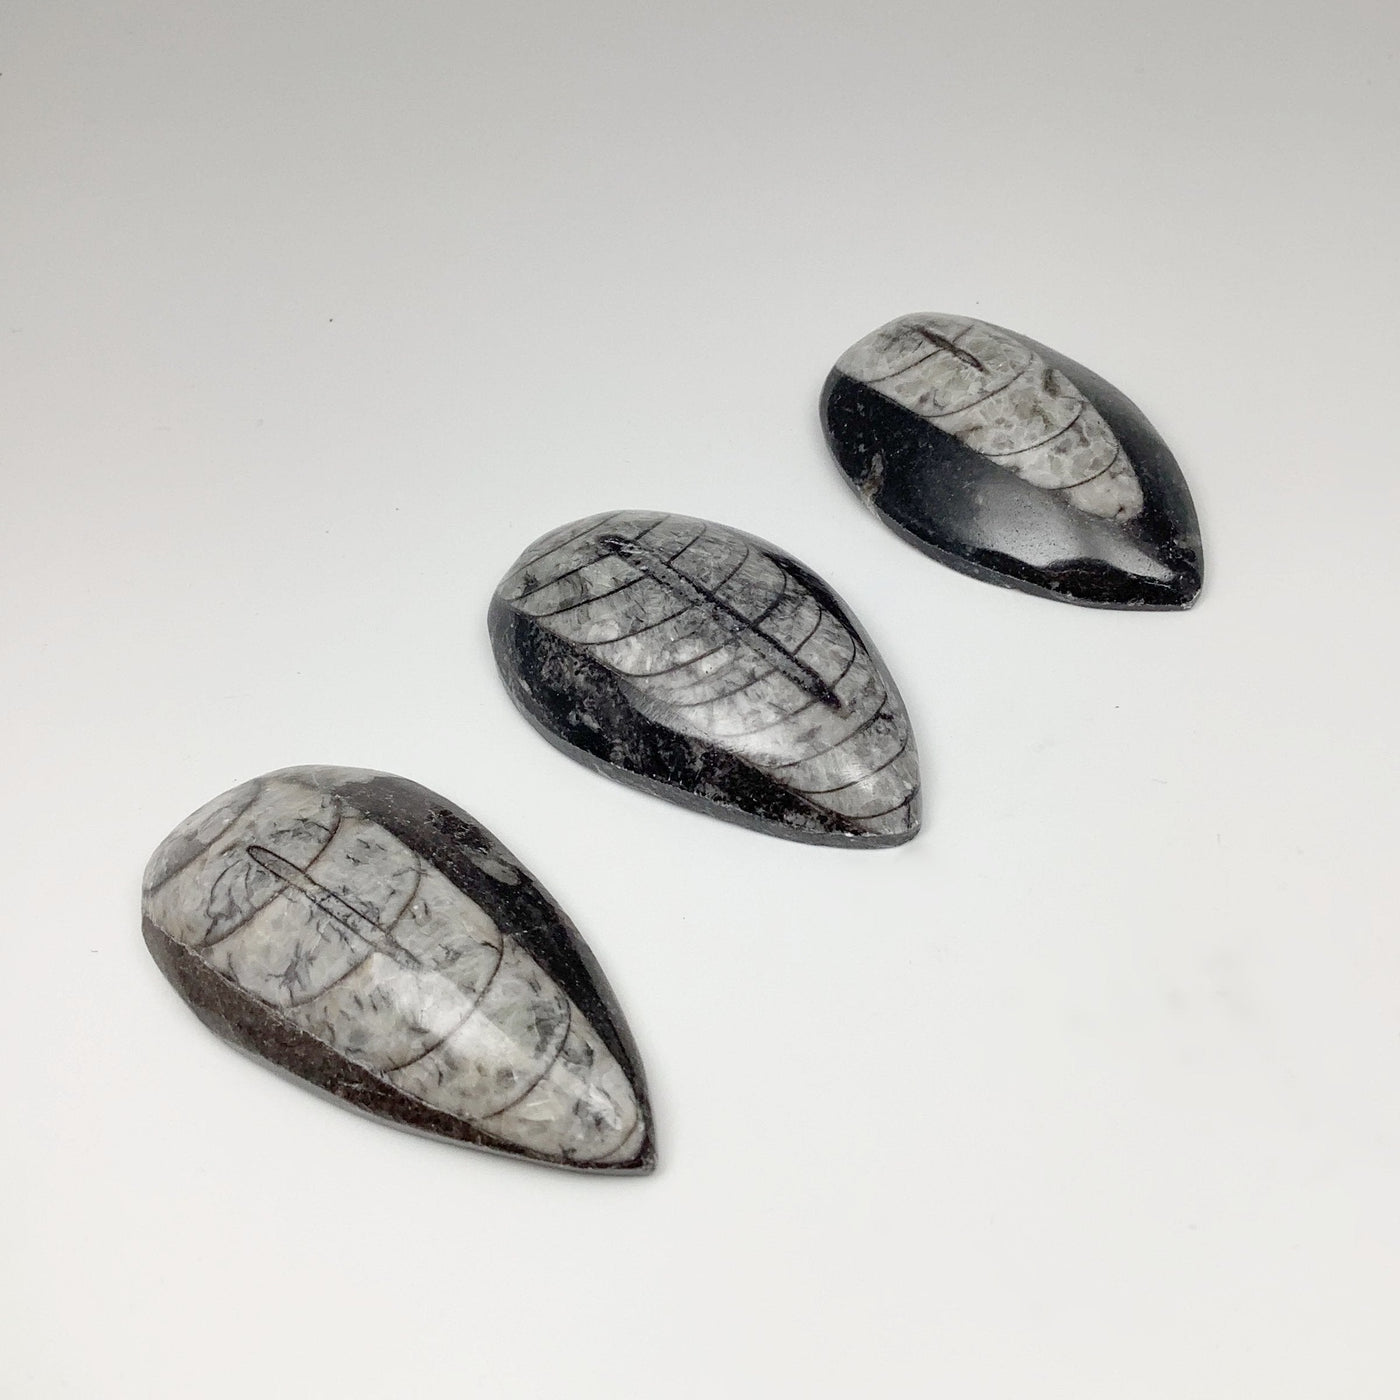 Small Polished Orthoceras Fossil